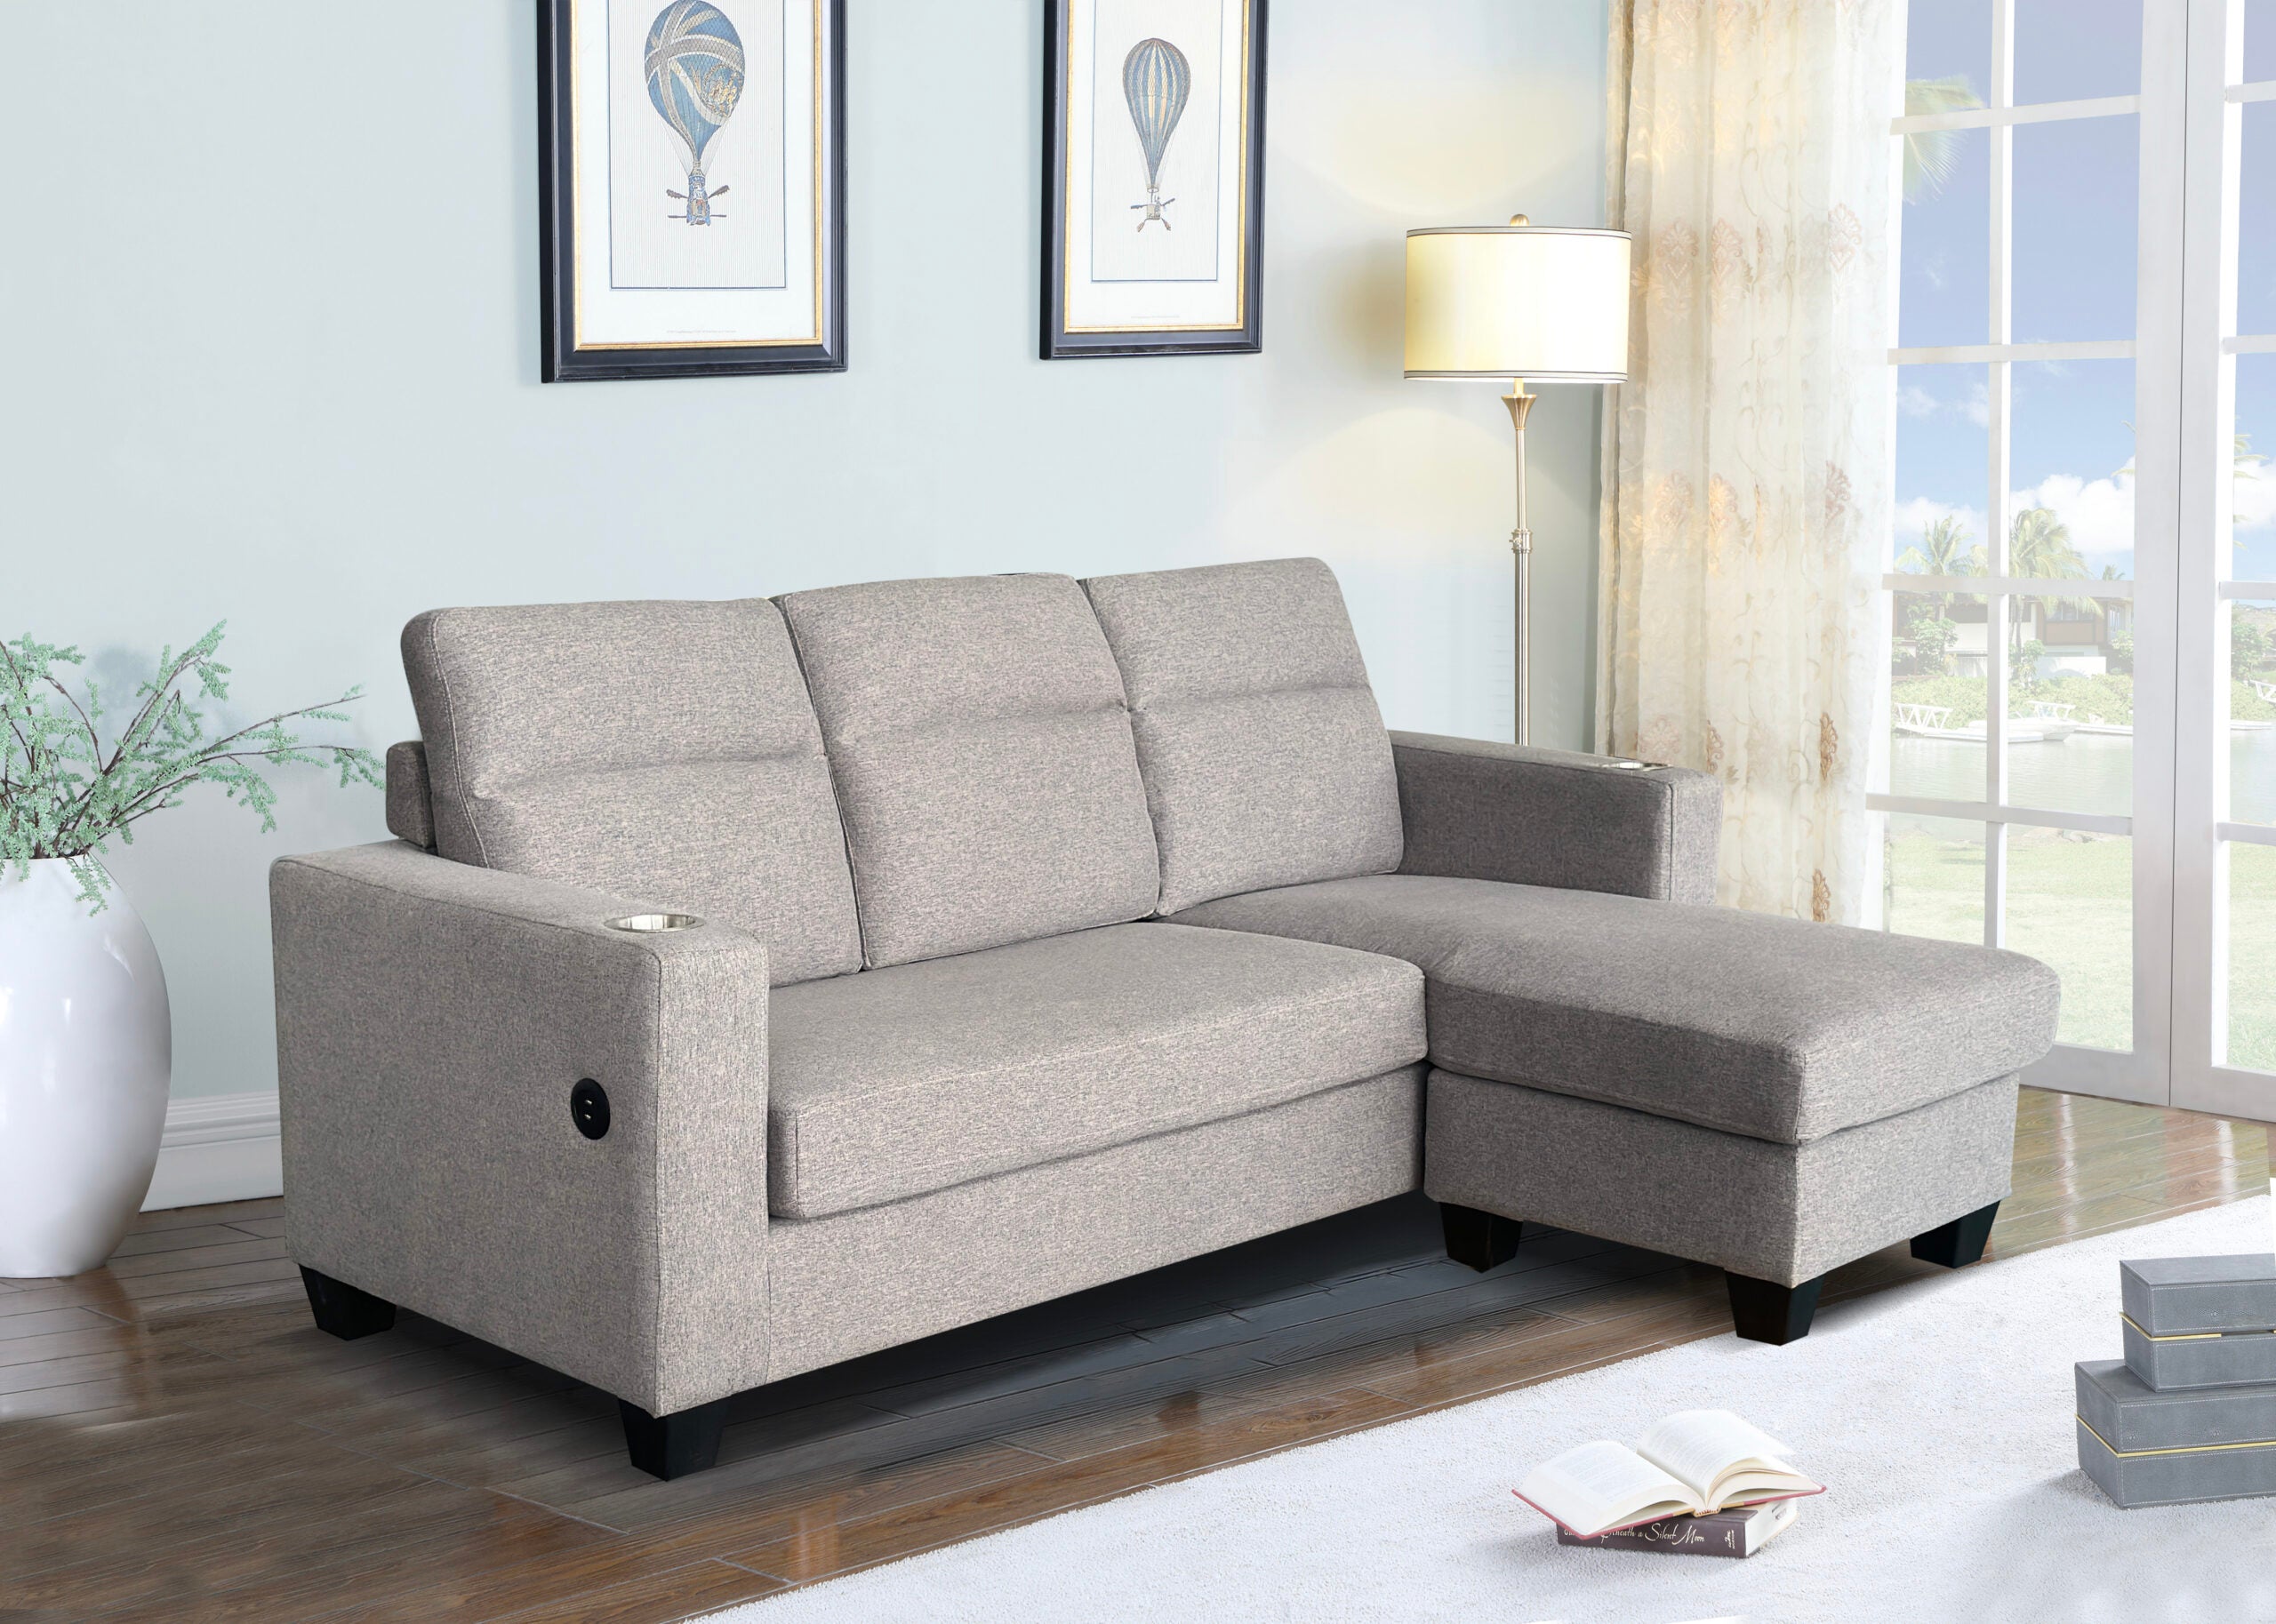 Chic Modern Fabric Sectional with Cupholders and USB PorT